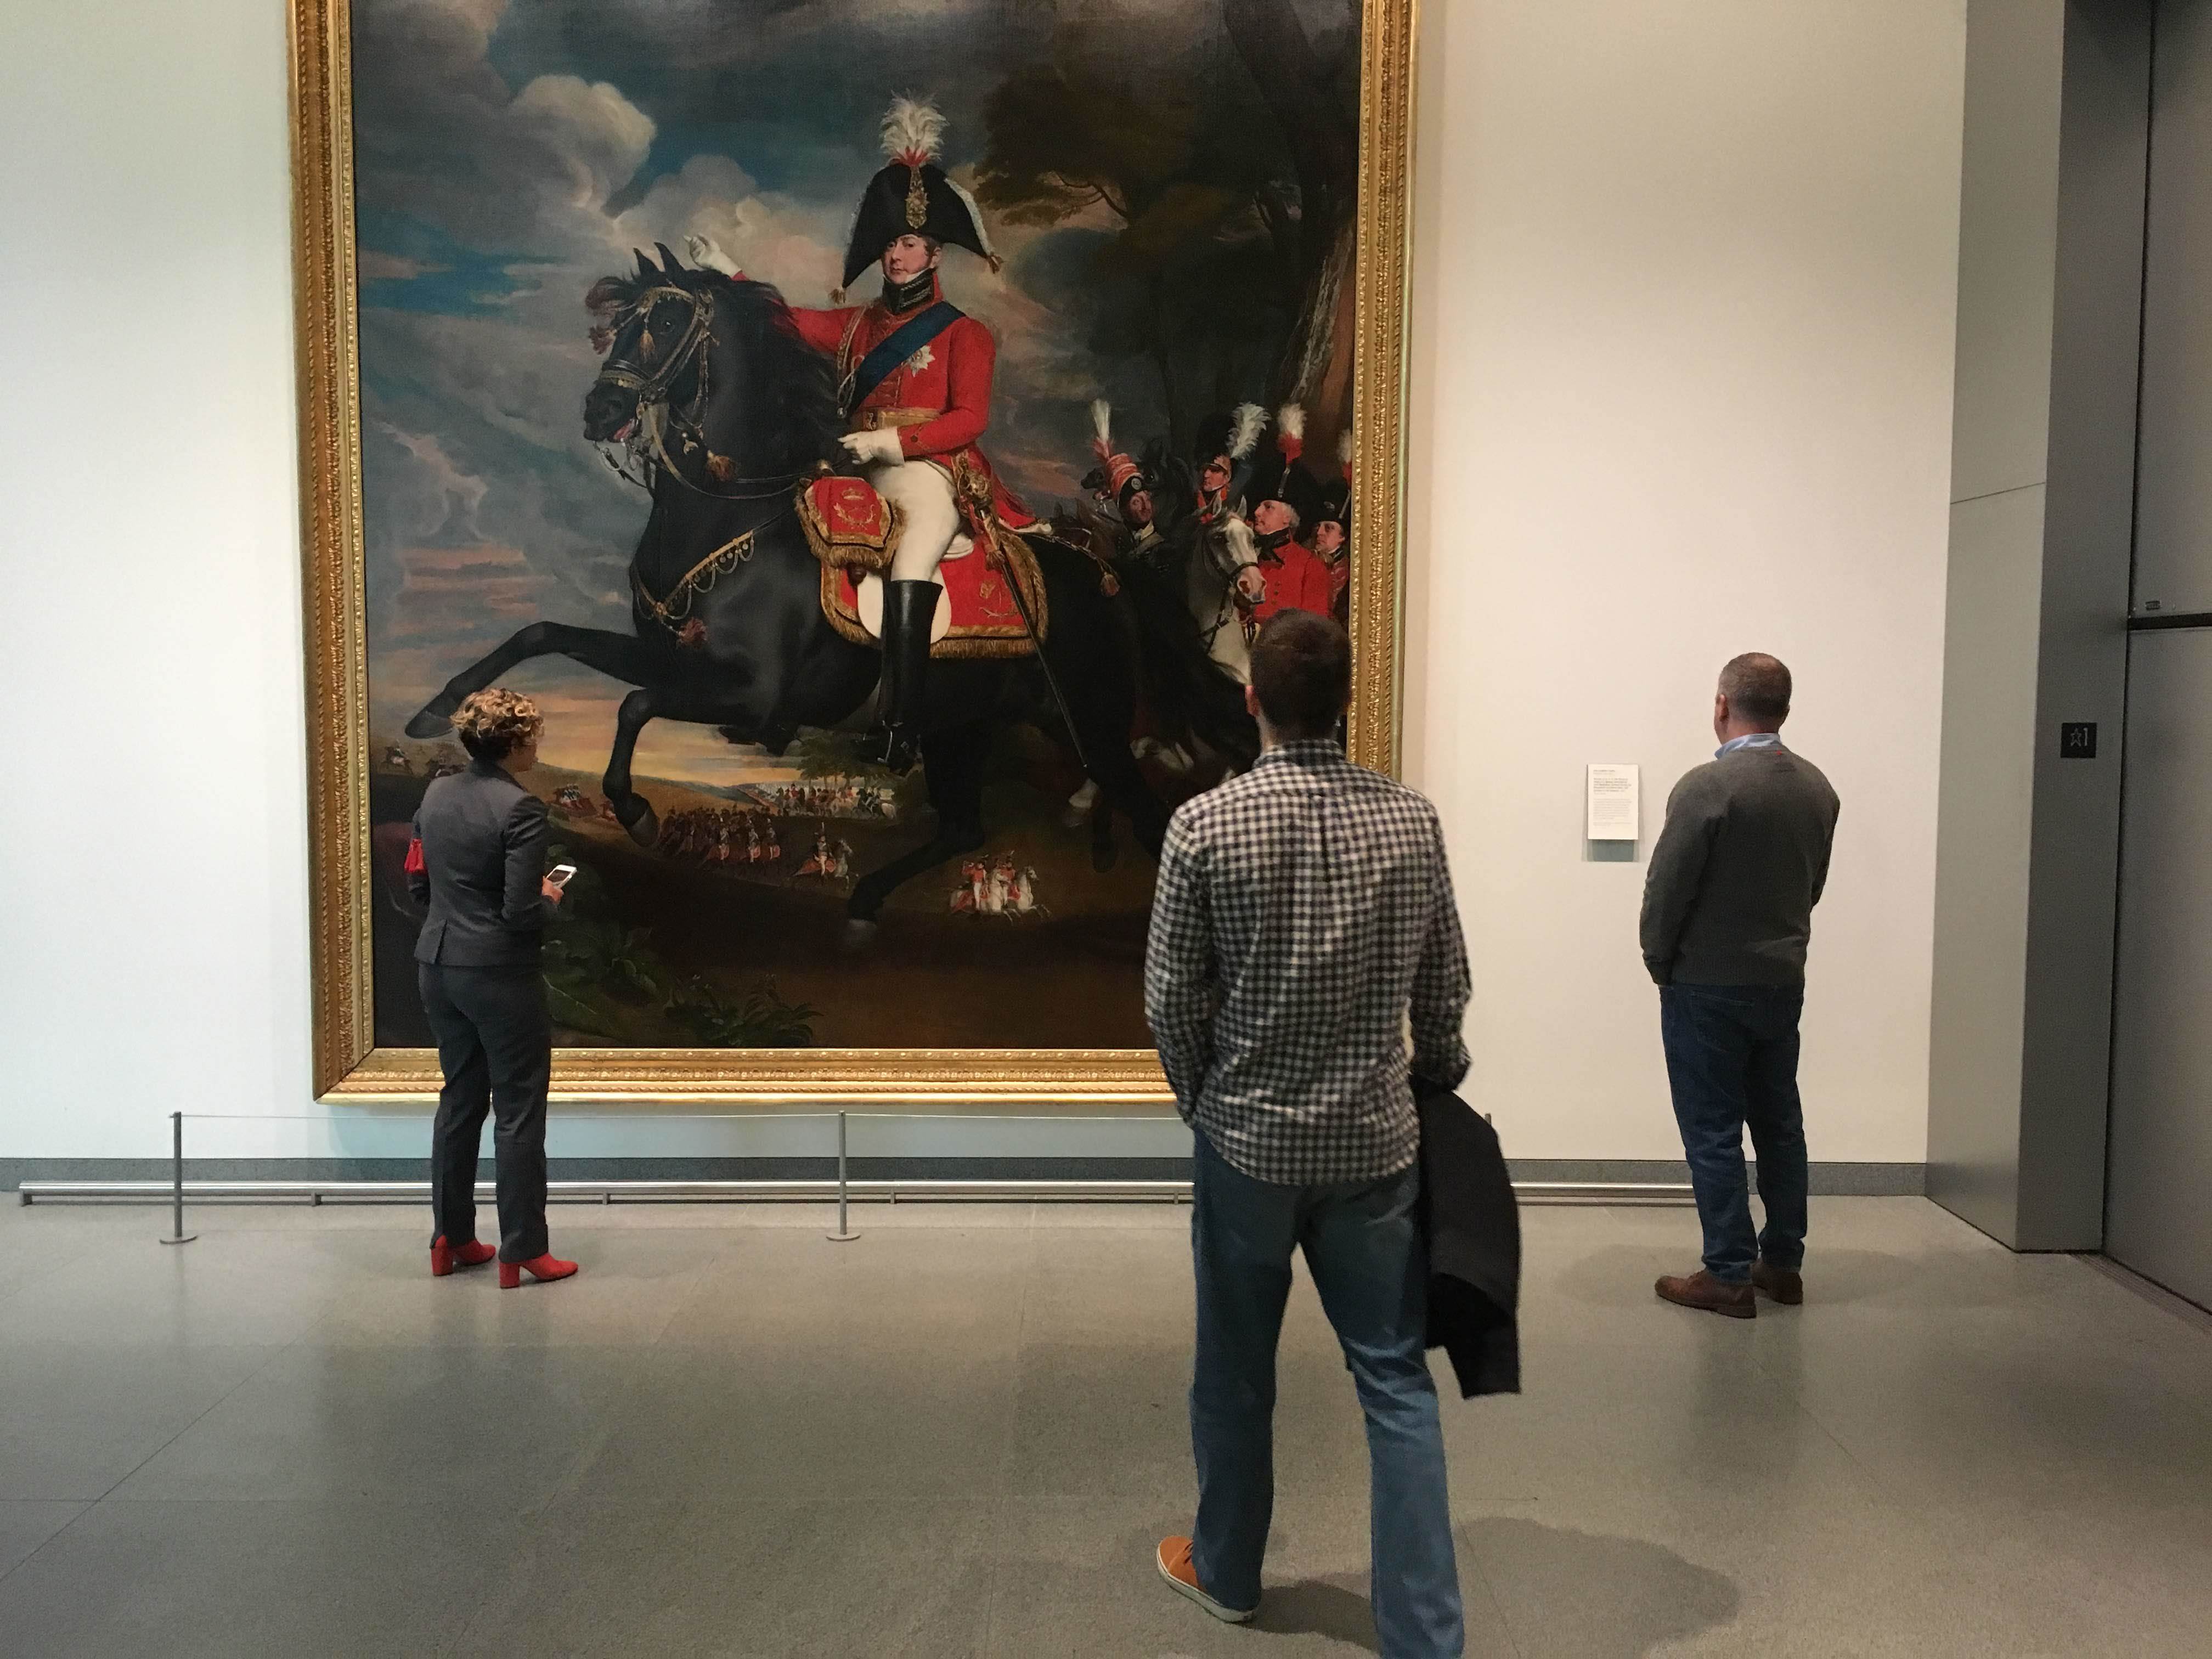 Three people admiring a large painting in an art gallery.